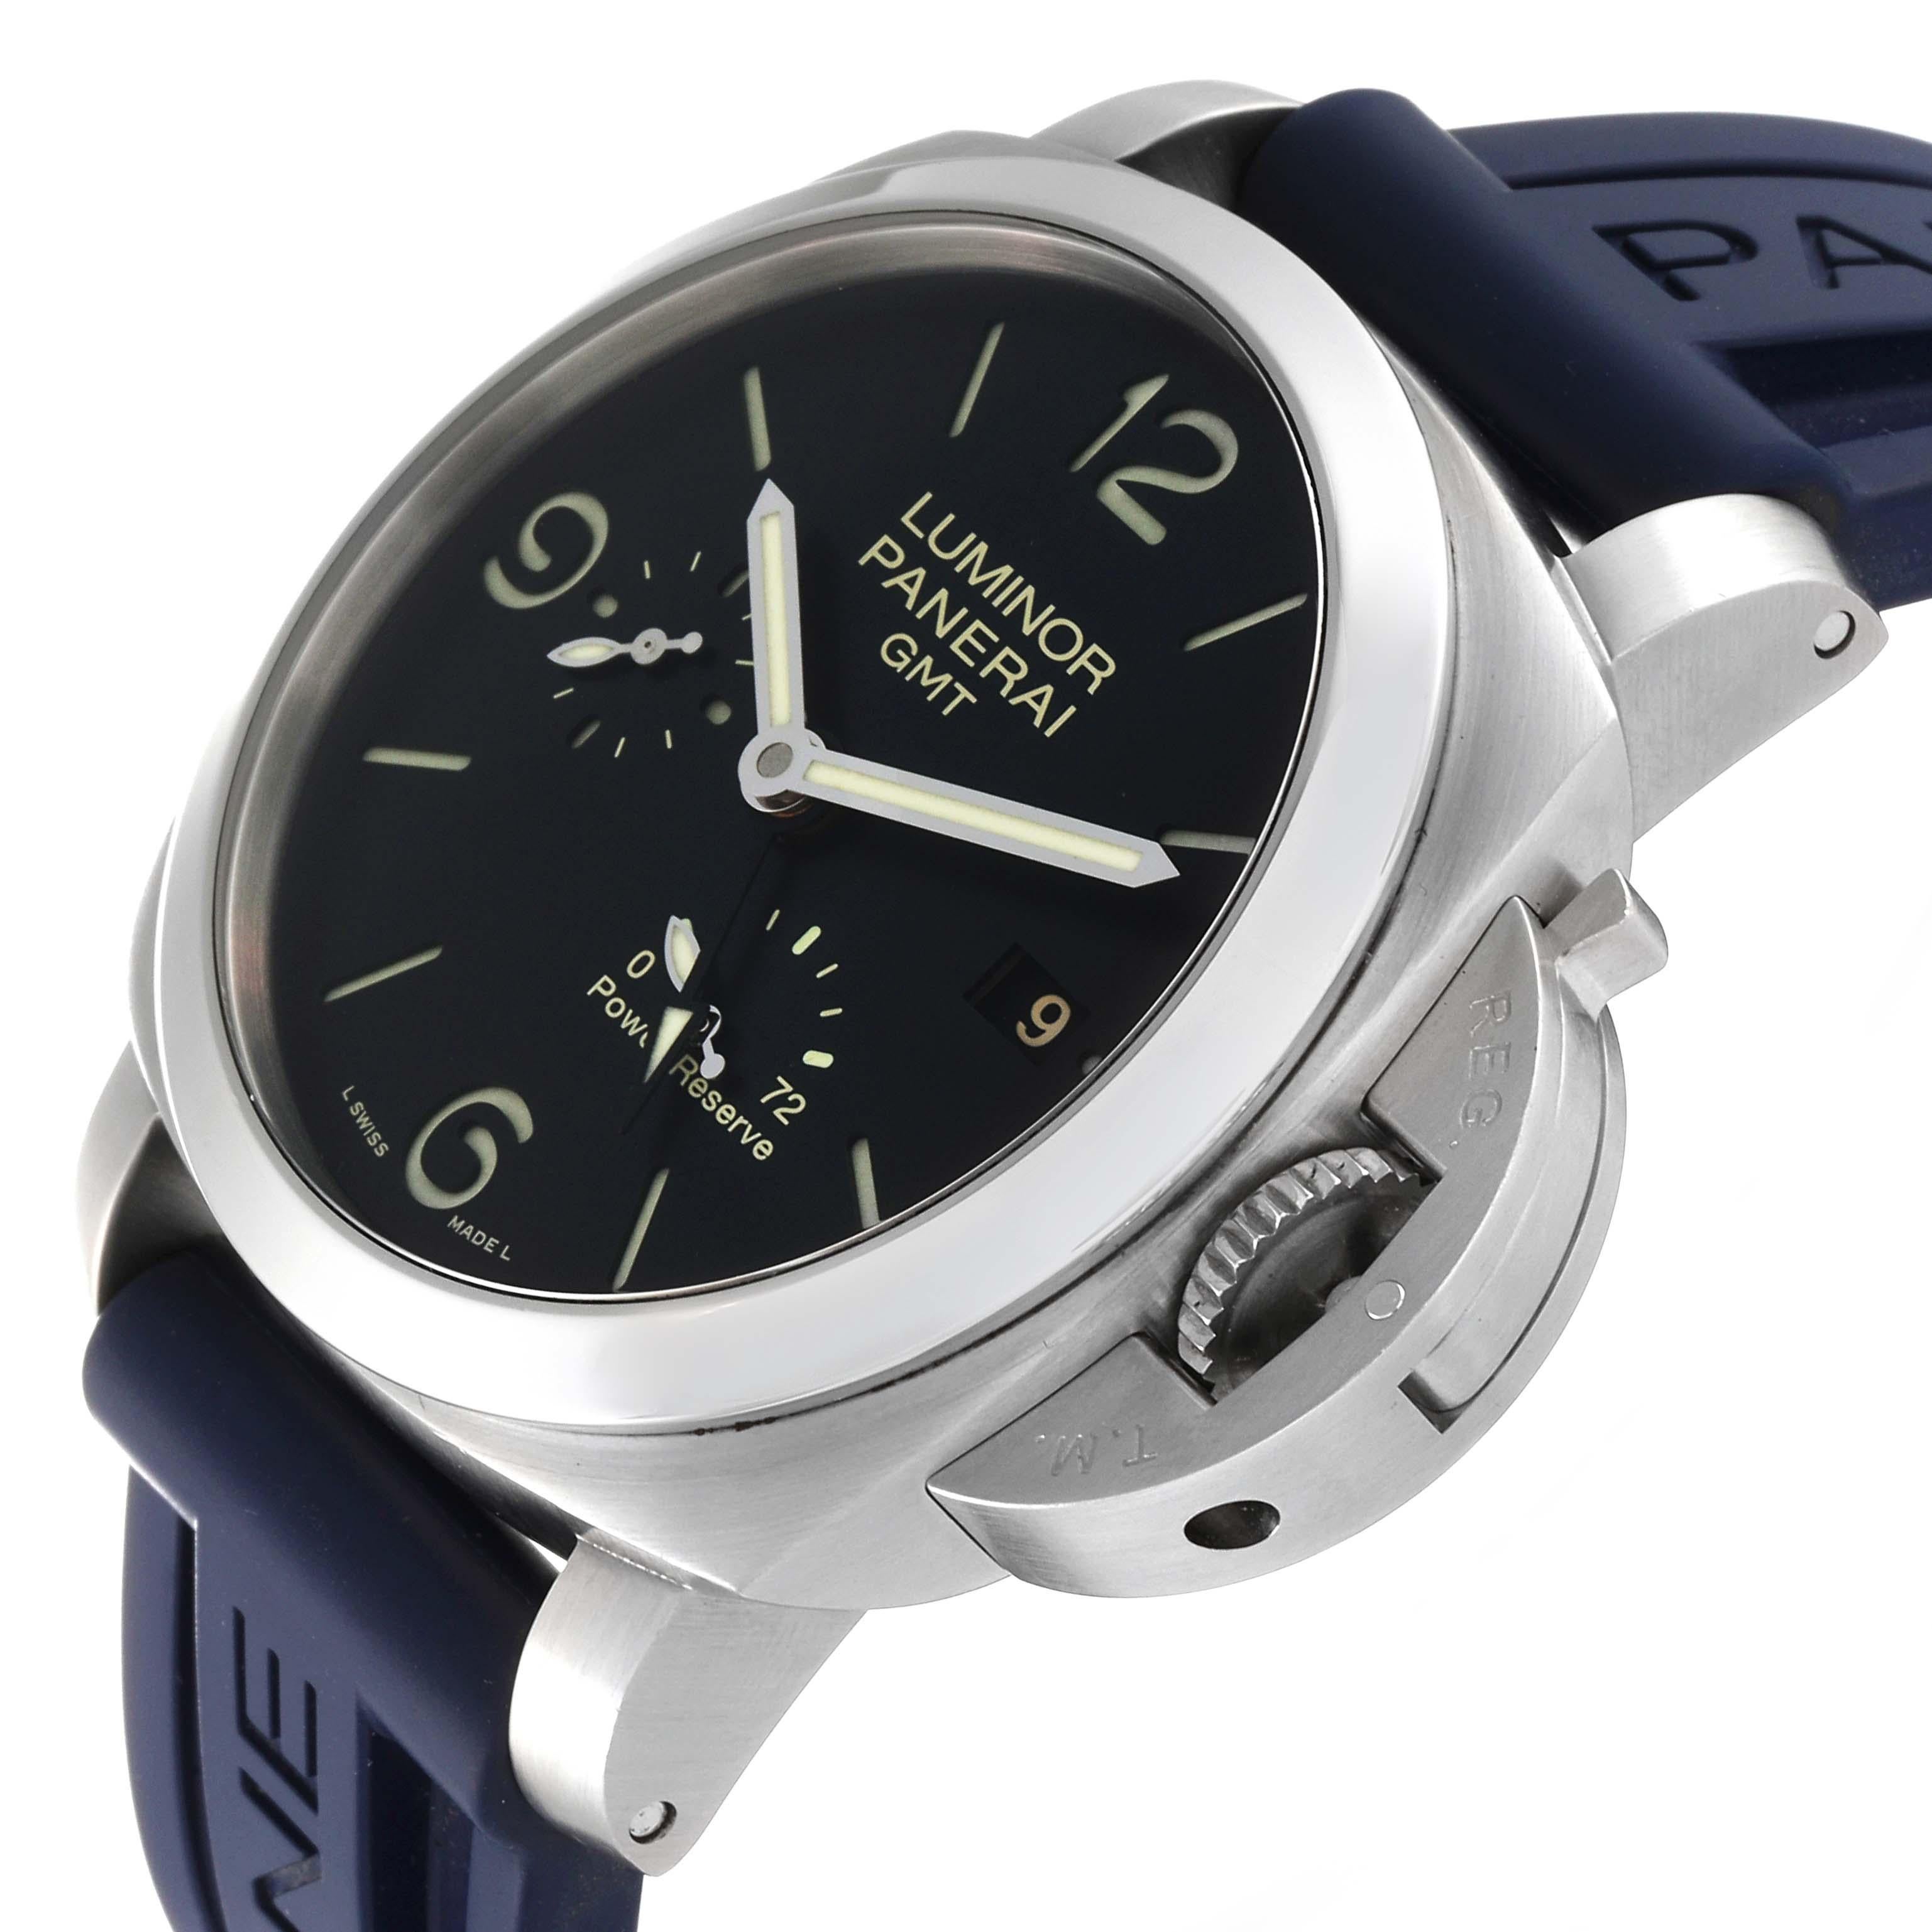 Panerai Luminor GMT 1950 3 Days Power Reserve Steel Mens Watch PAM00321 In Excellent Condition For Sale In Atlanta, GA